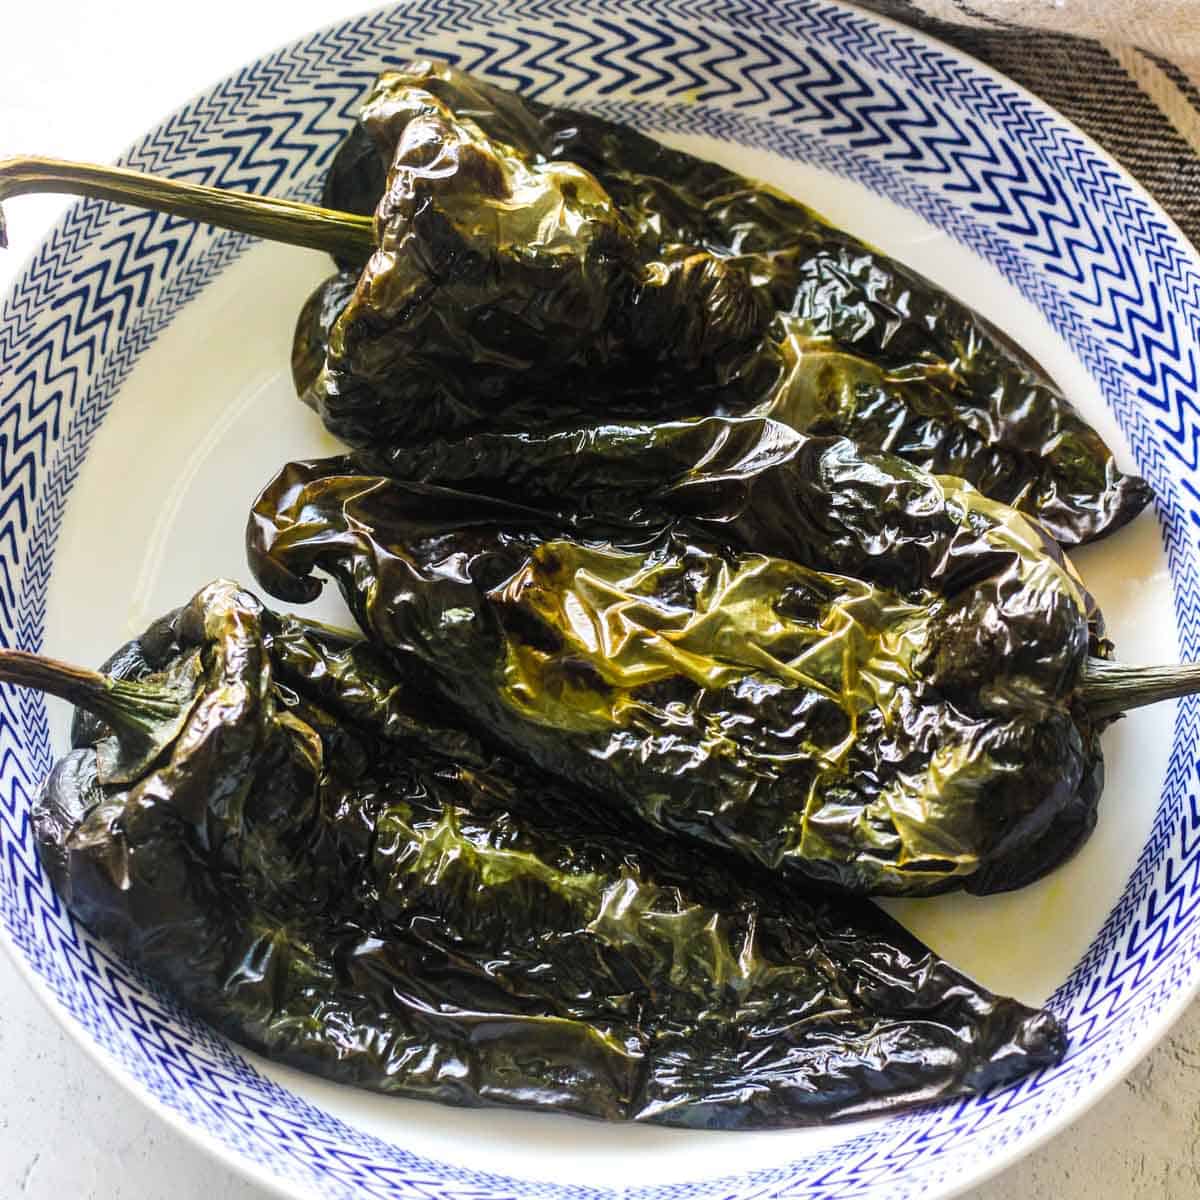 How To Store Roasted Poblano Peppers